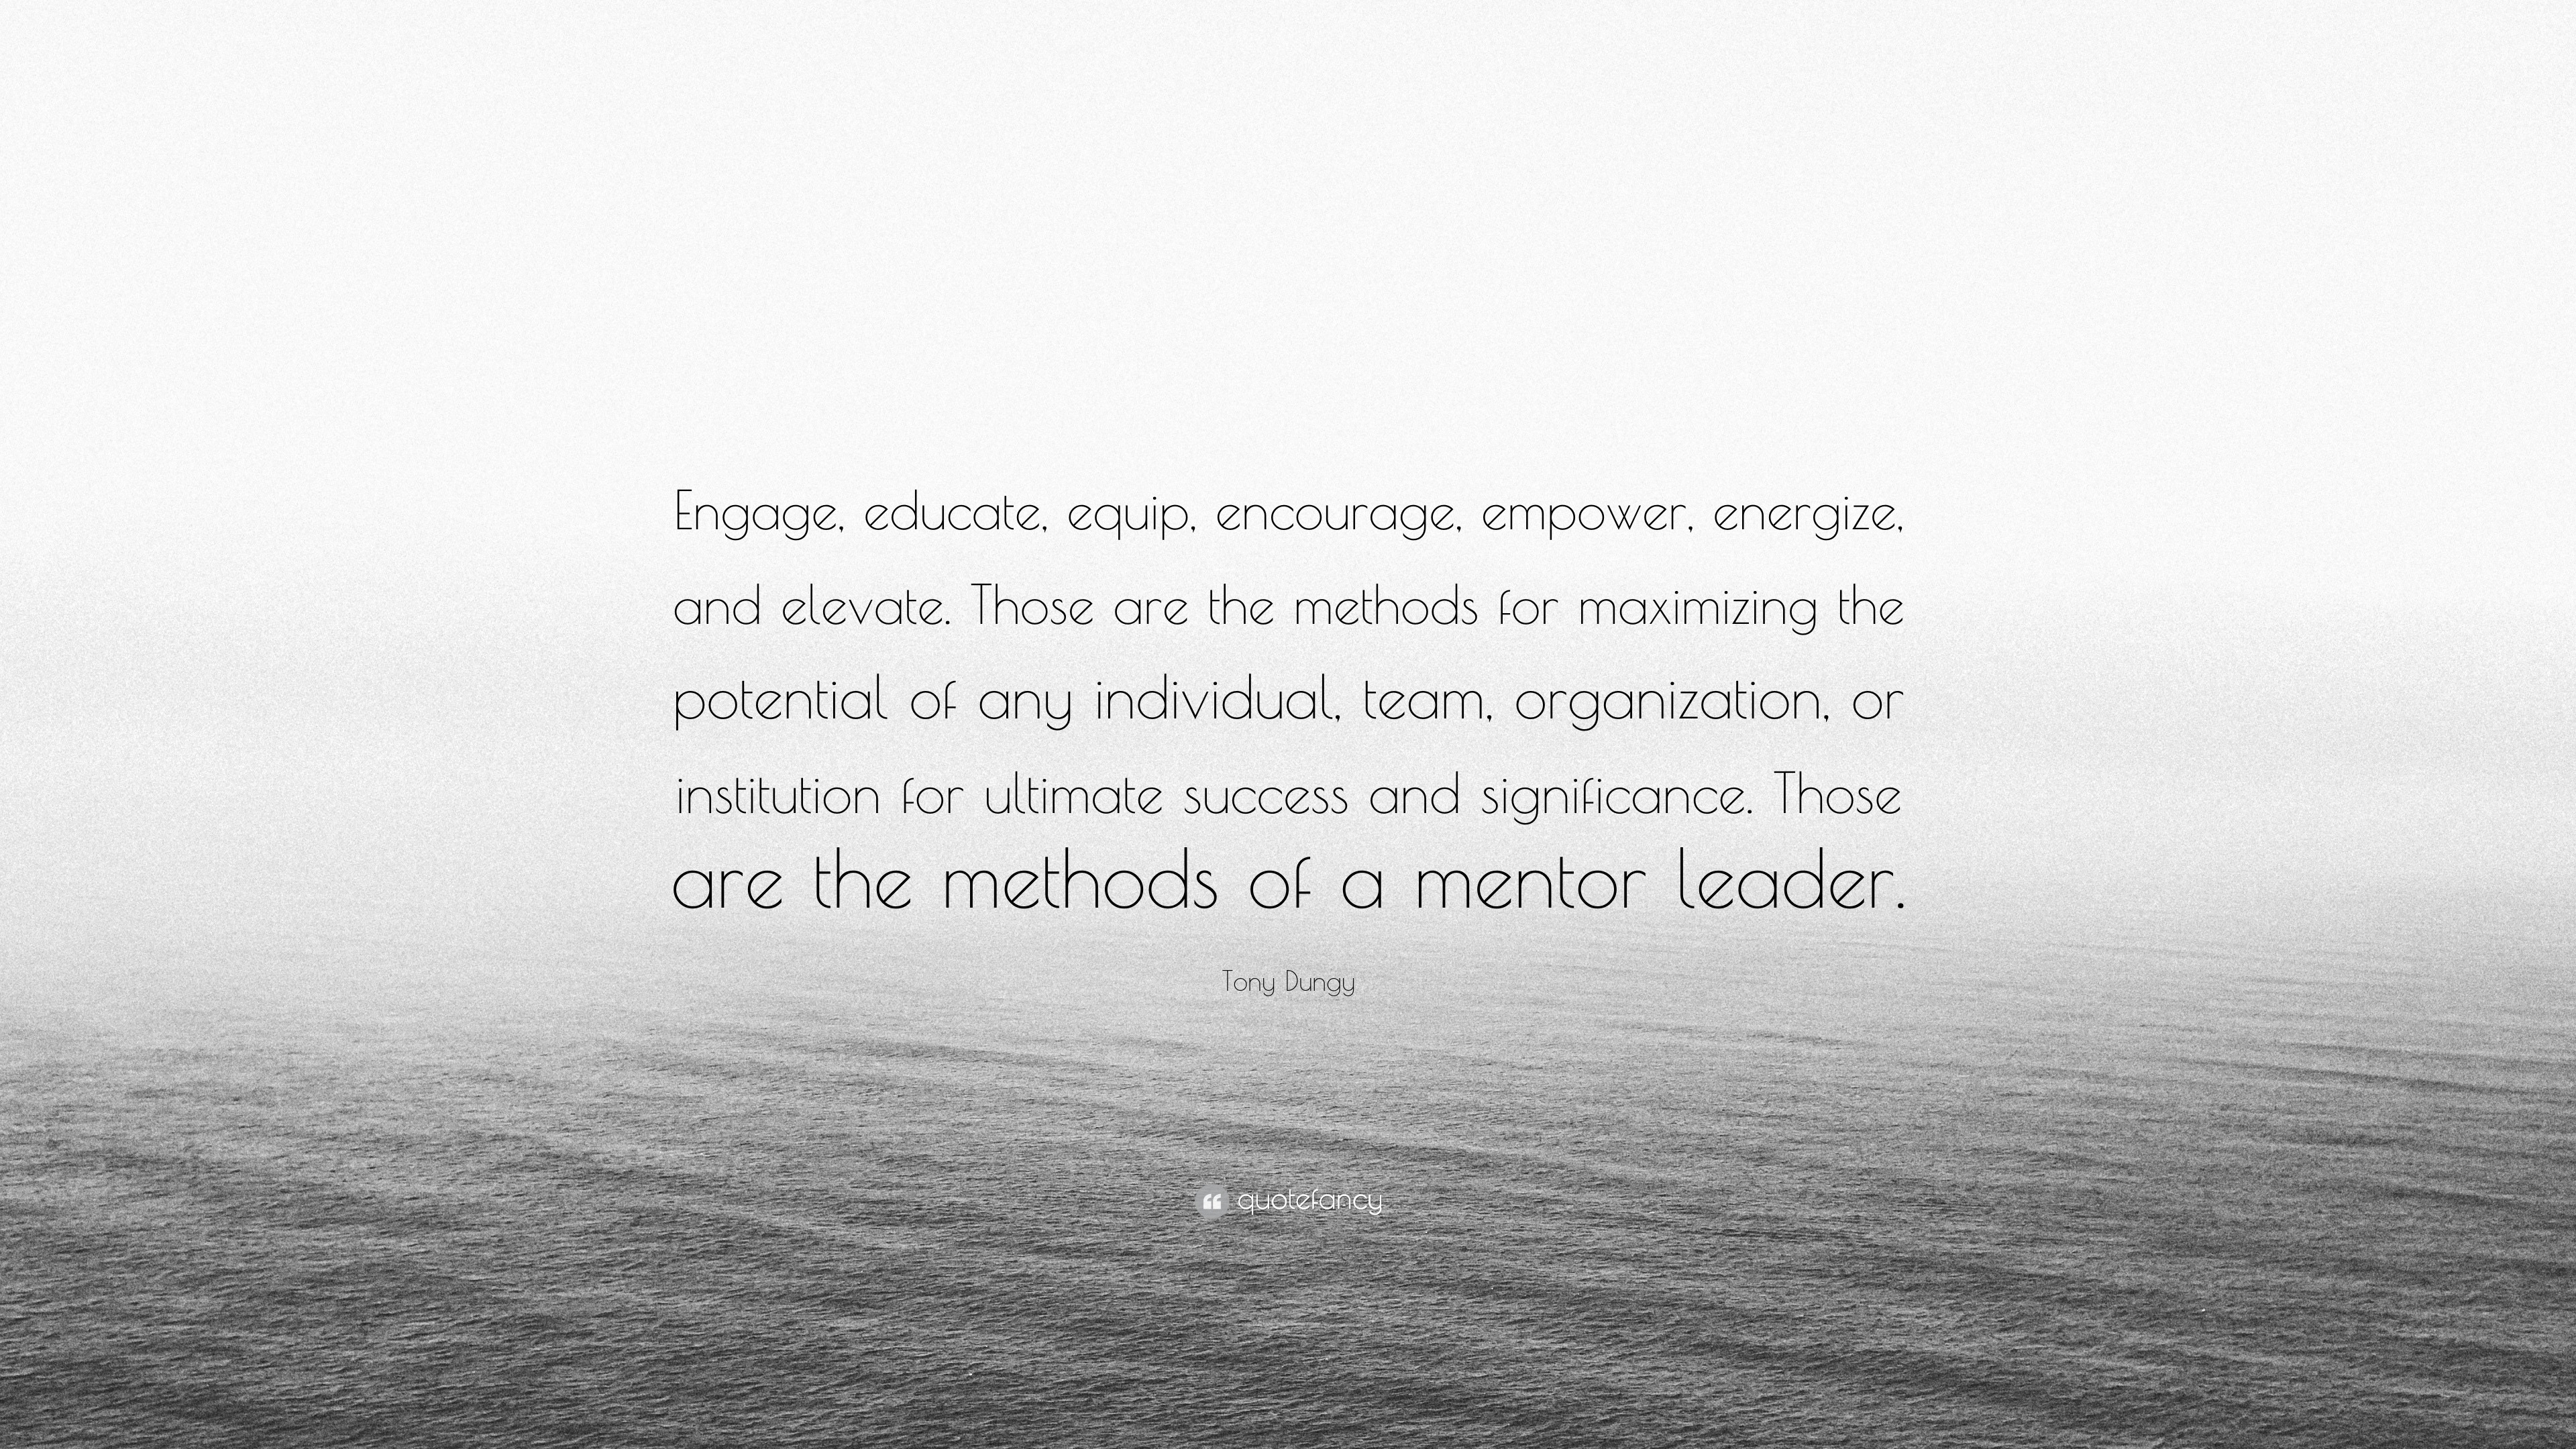 Putting Students in the Driver's Seat: Equip, Empower, Energize